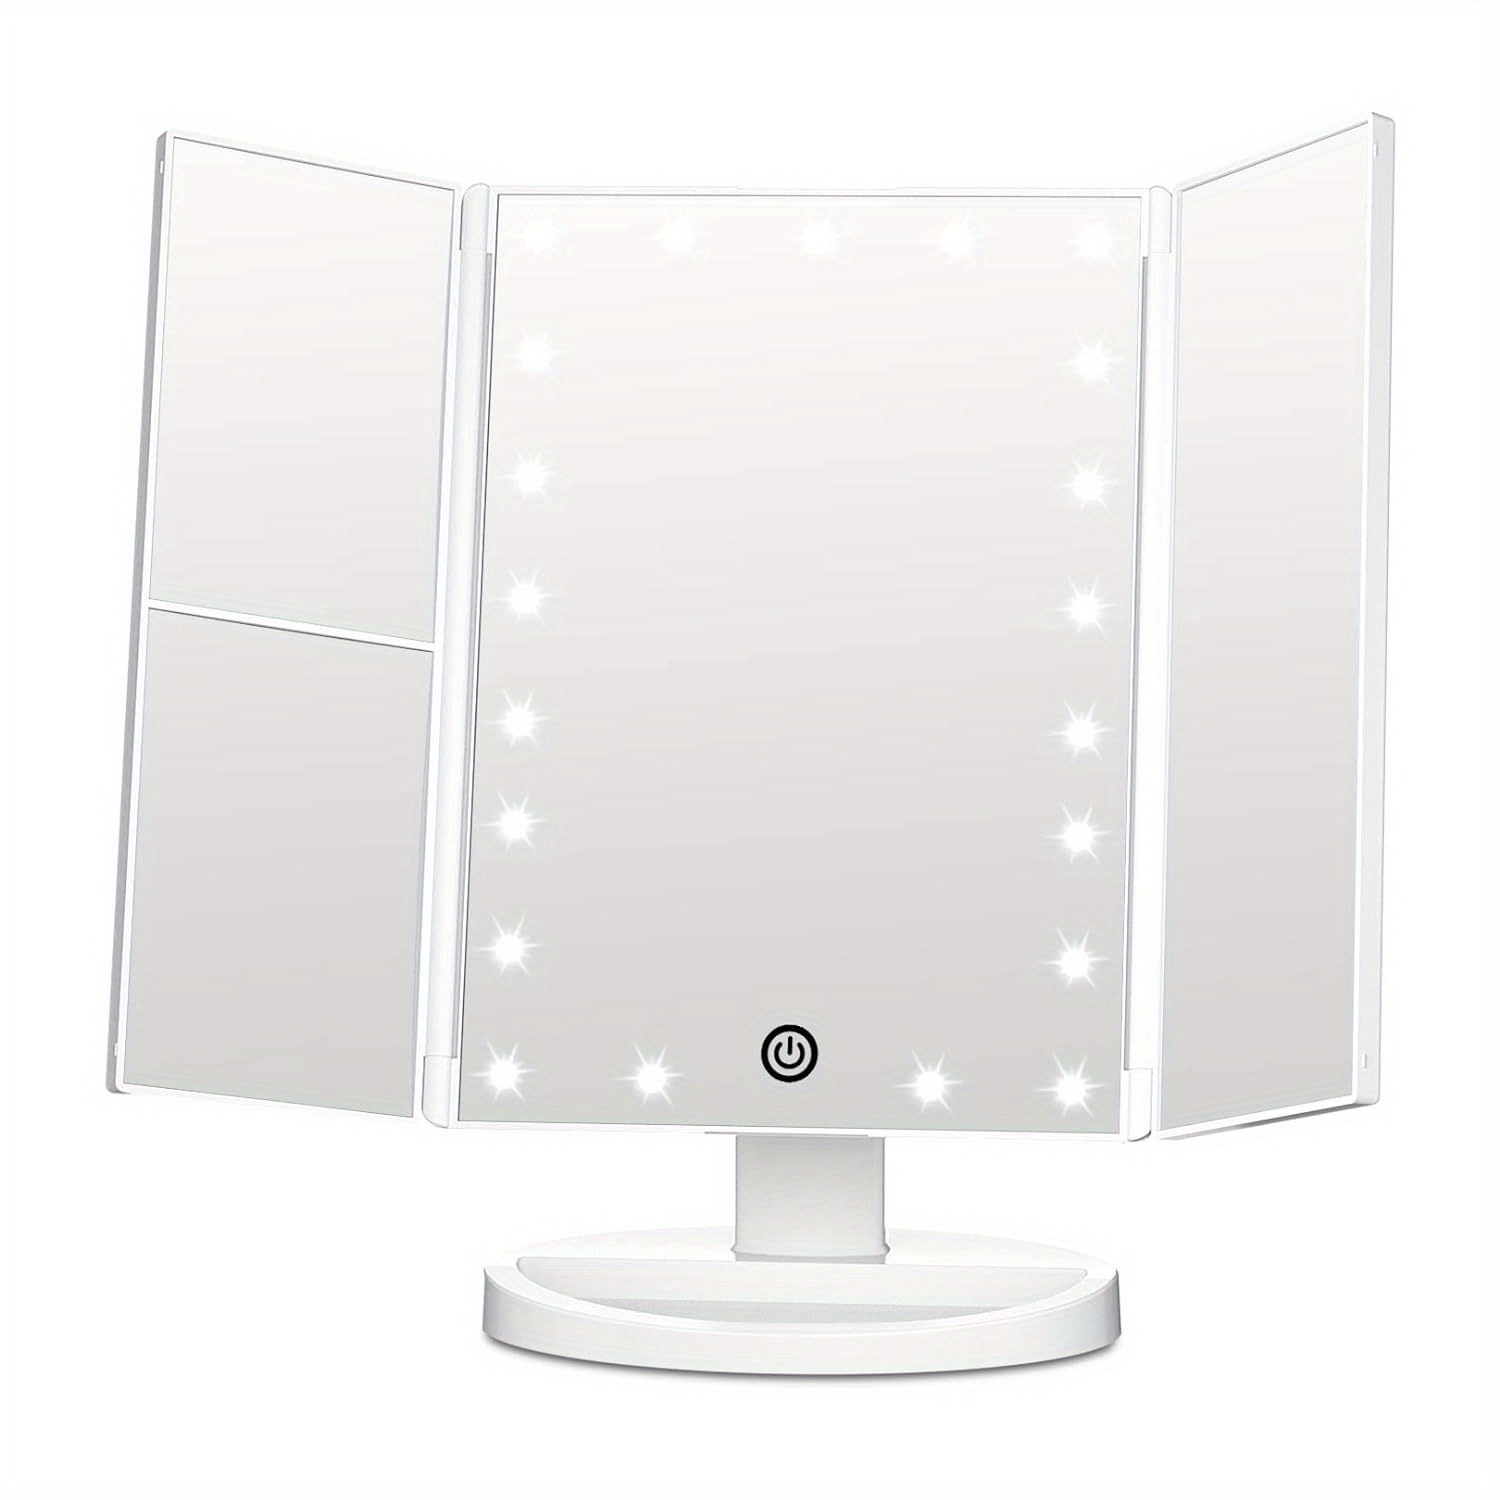 

Trifold Vanity Mirror With Lights, Lighted Makeup Mirror 2x/3x Magnification, Touch Dimming, Dual Power 180° Rotation Lit Beauty Table Mirror, Make Up Mirror With Lighting